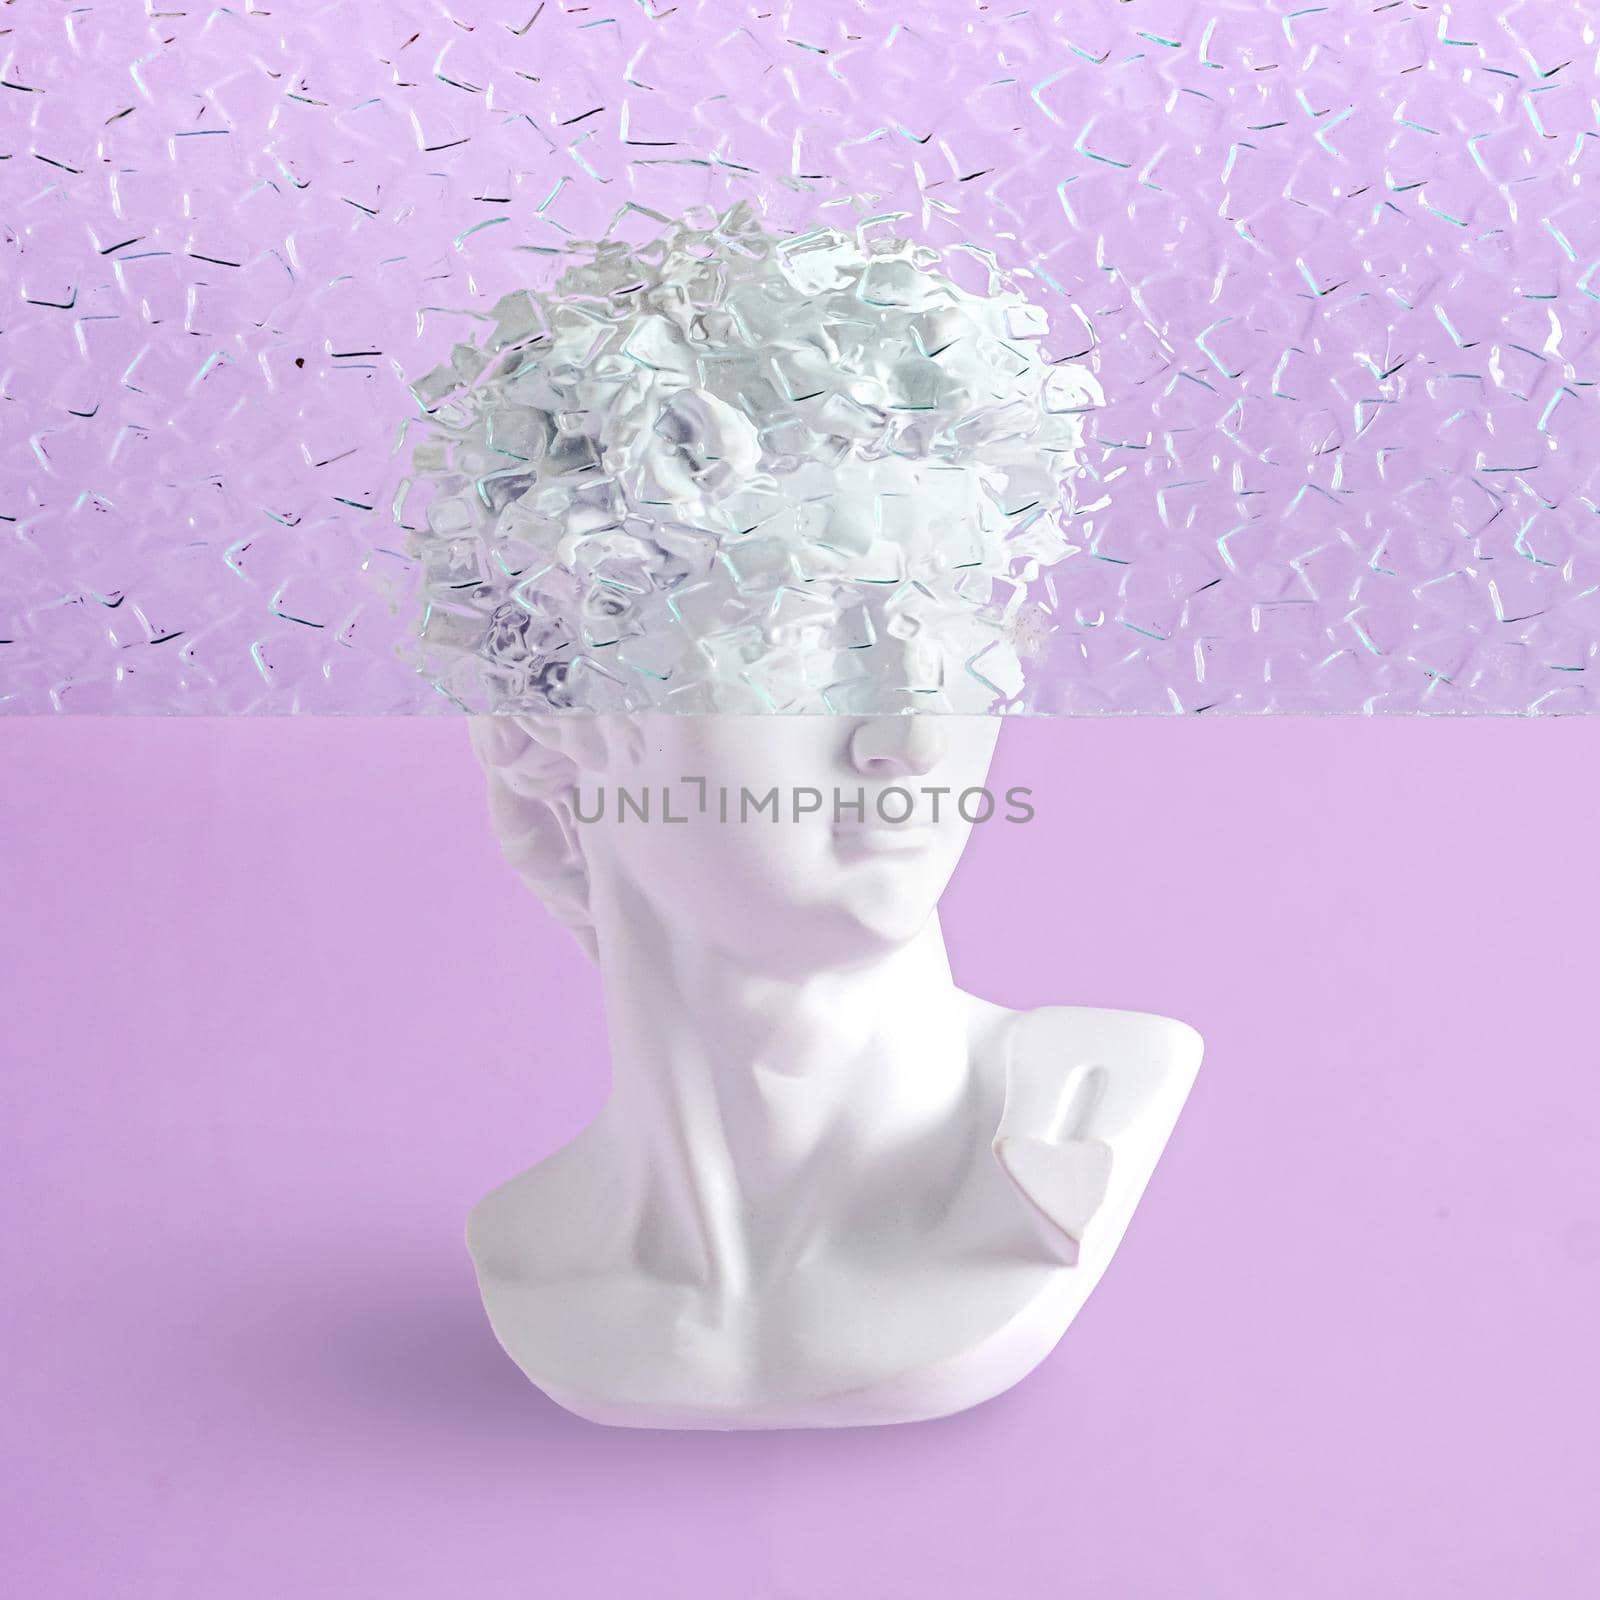 Bust of a statue of David on a purple background with fluted glass and part of the head is hidden. Contemporary minimal vaporwave concept.